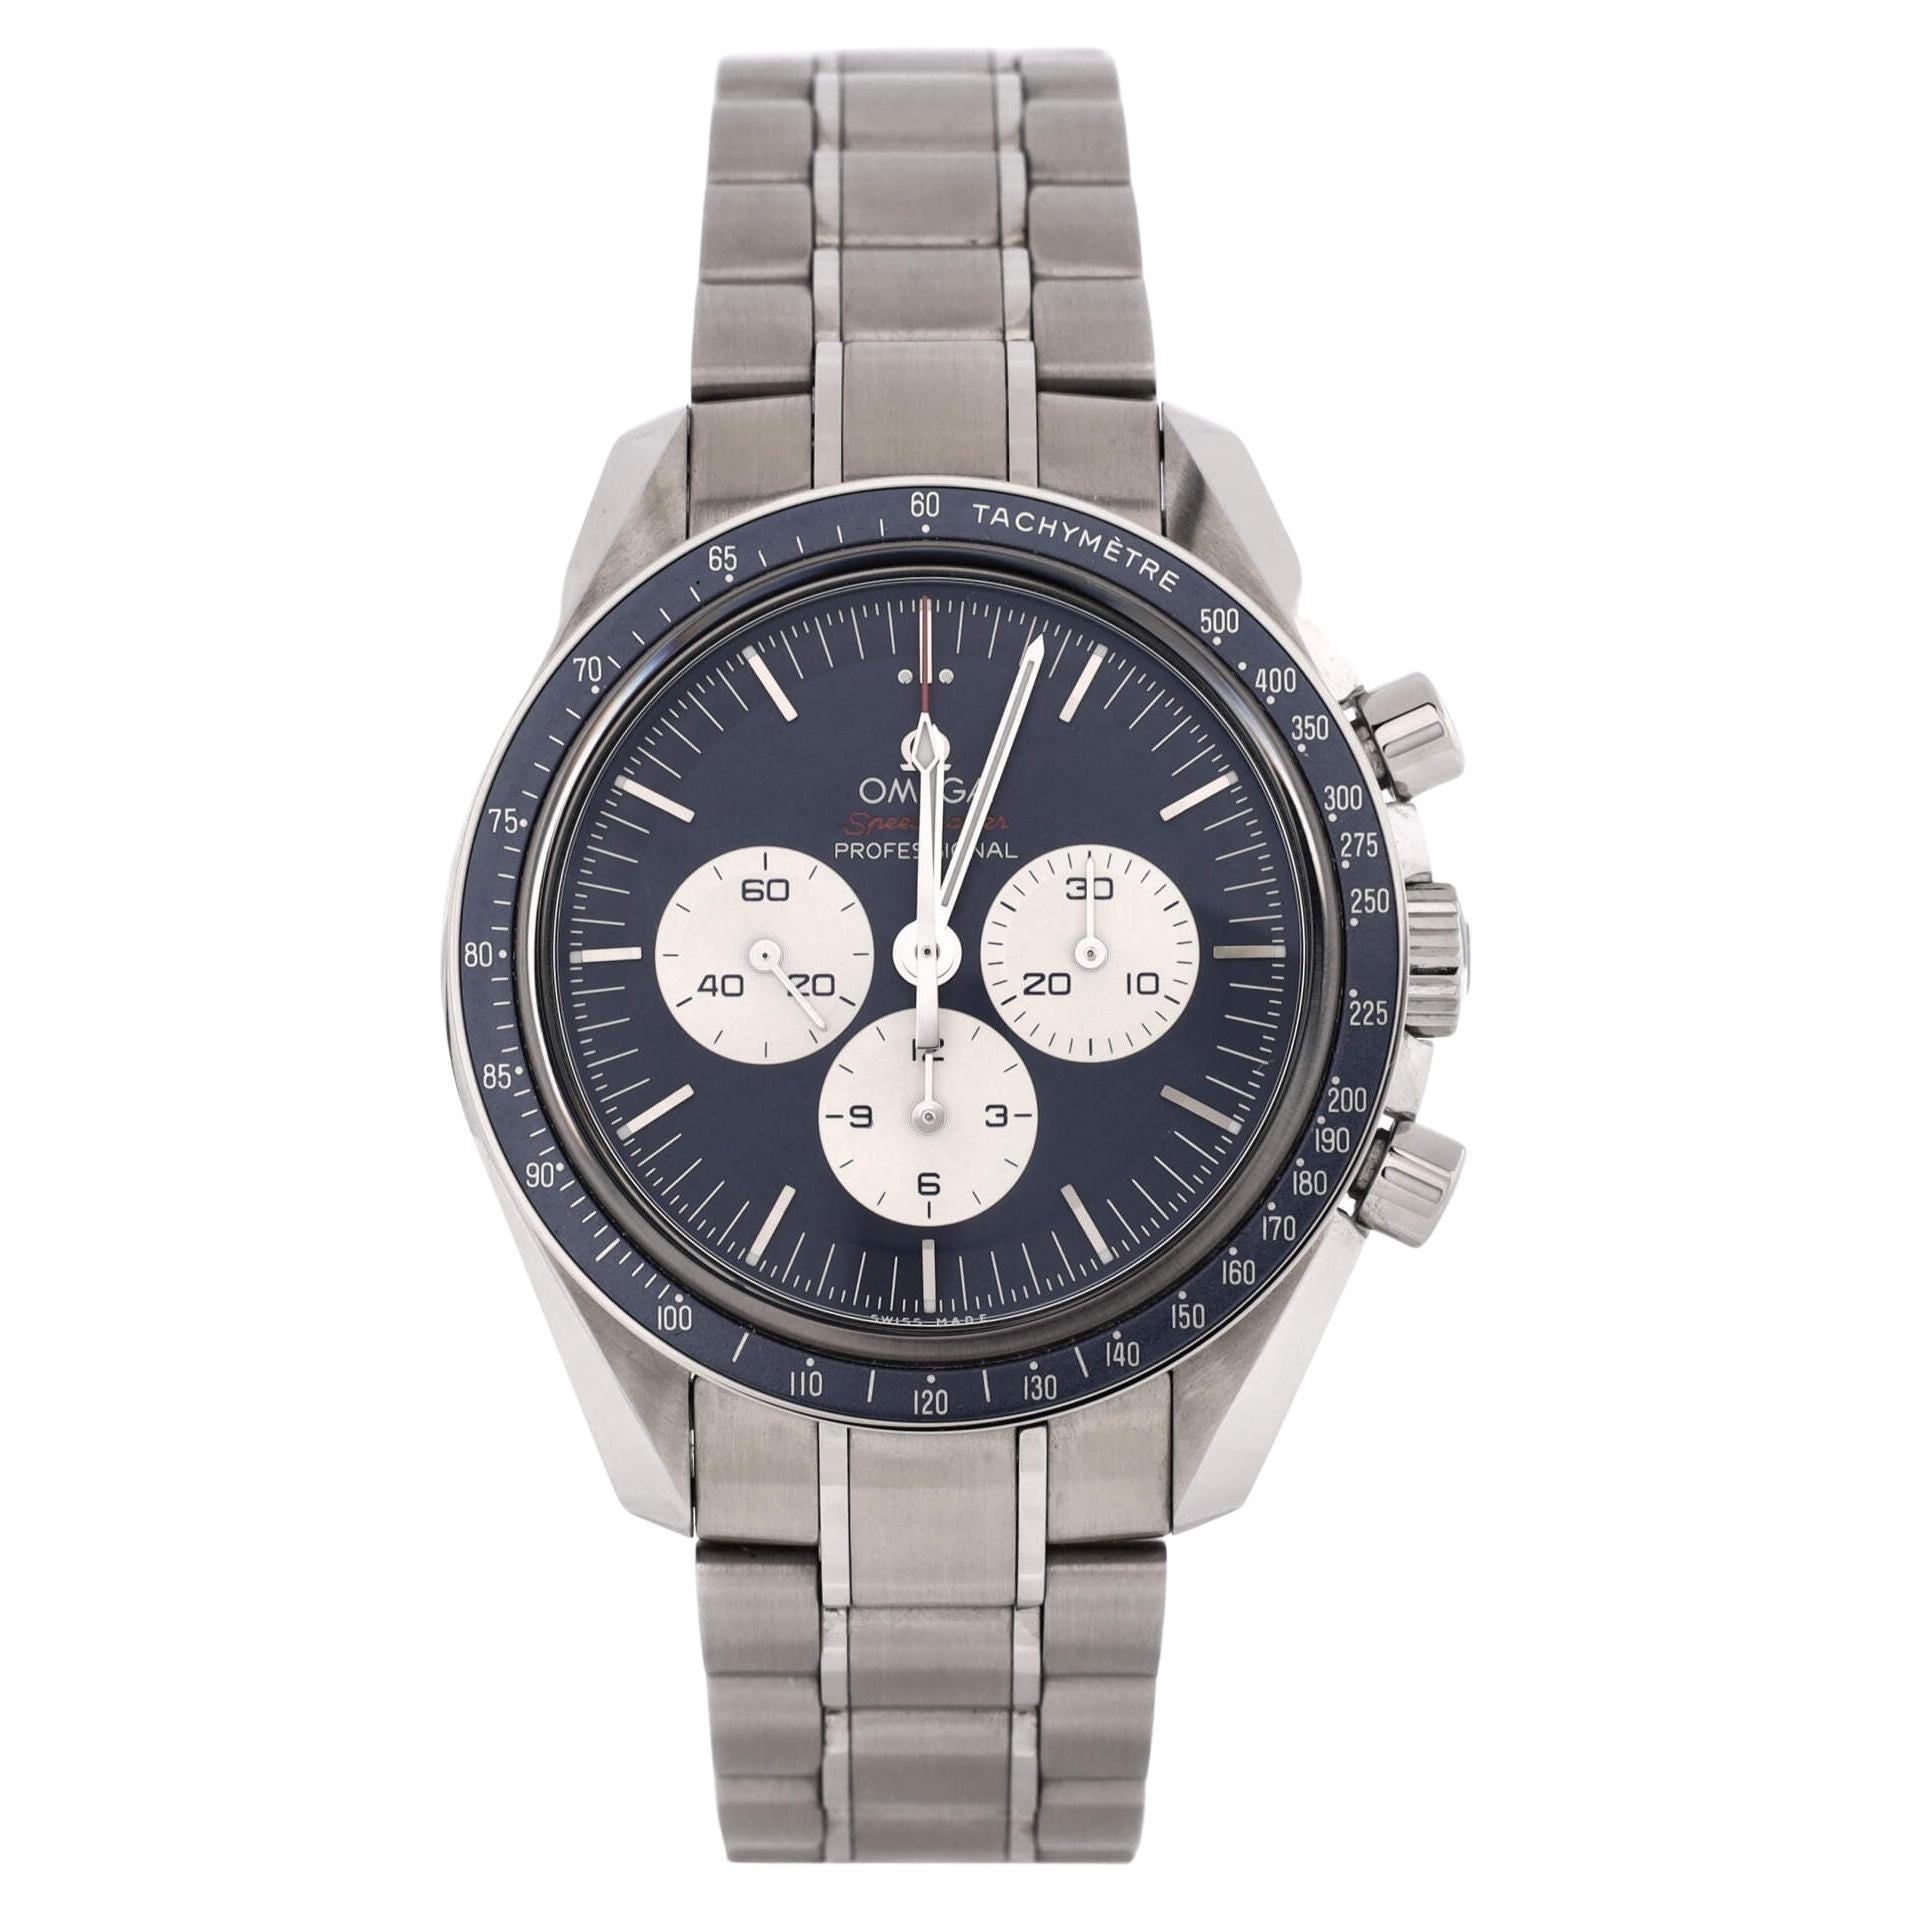 Omega Speedmaster Professional Tokyo Olympic Chronograph Limited Edition Manual